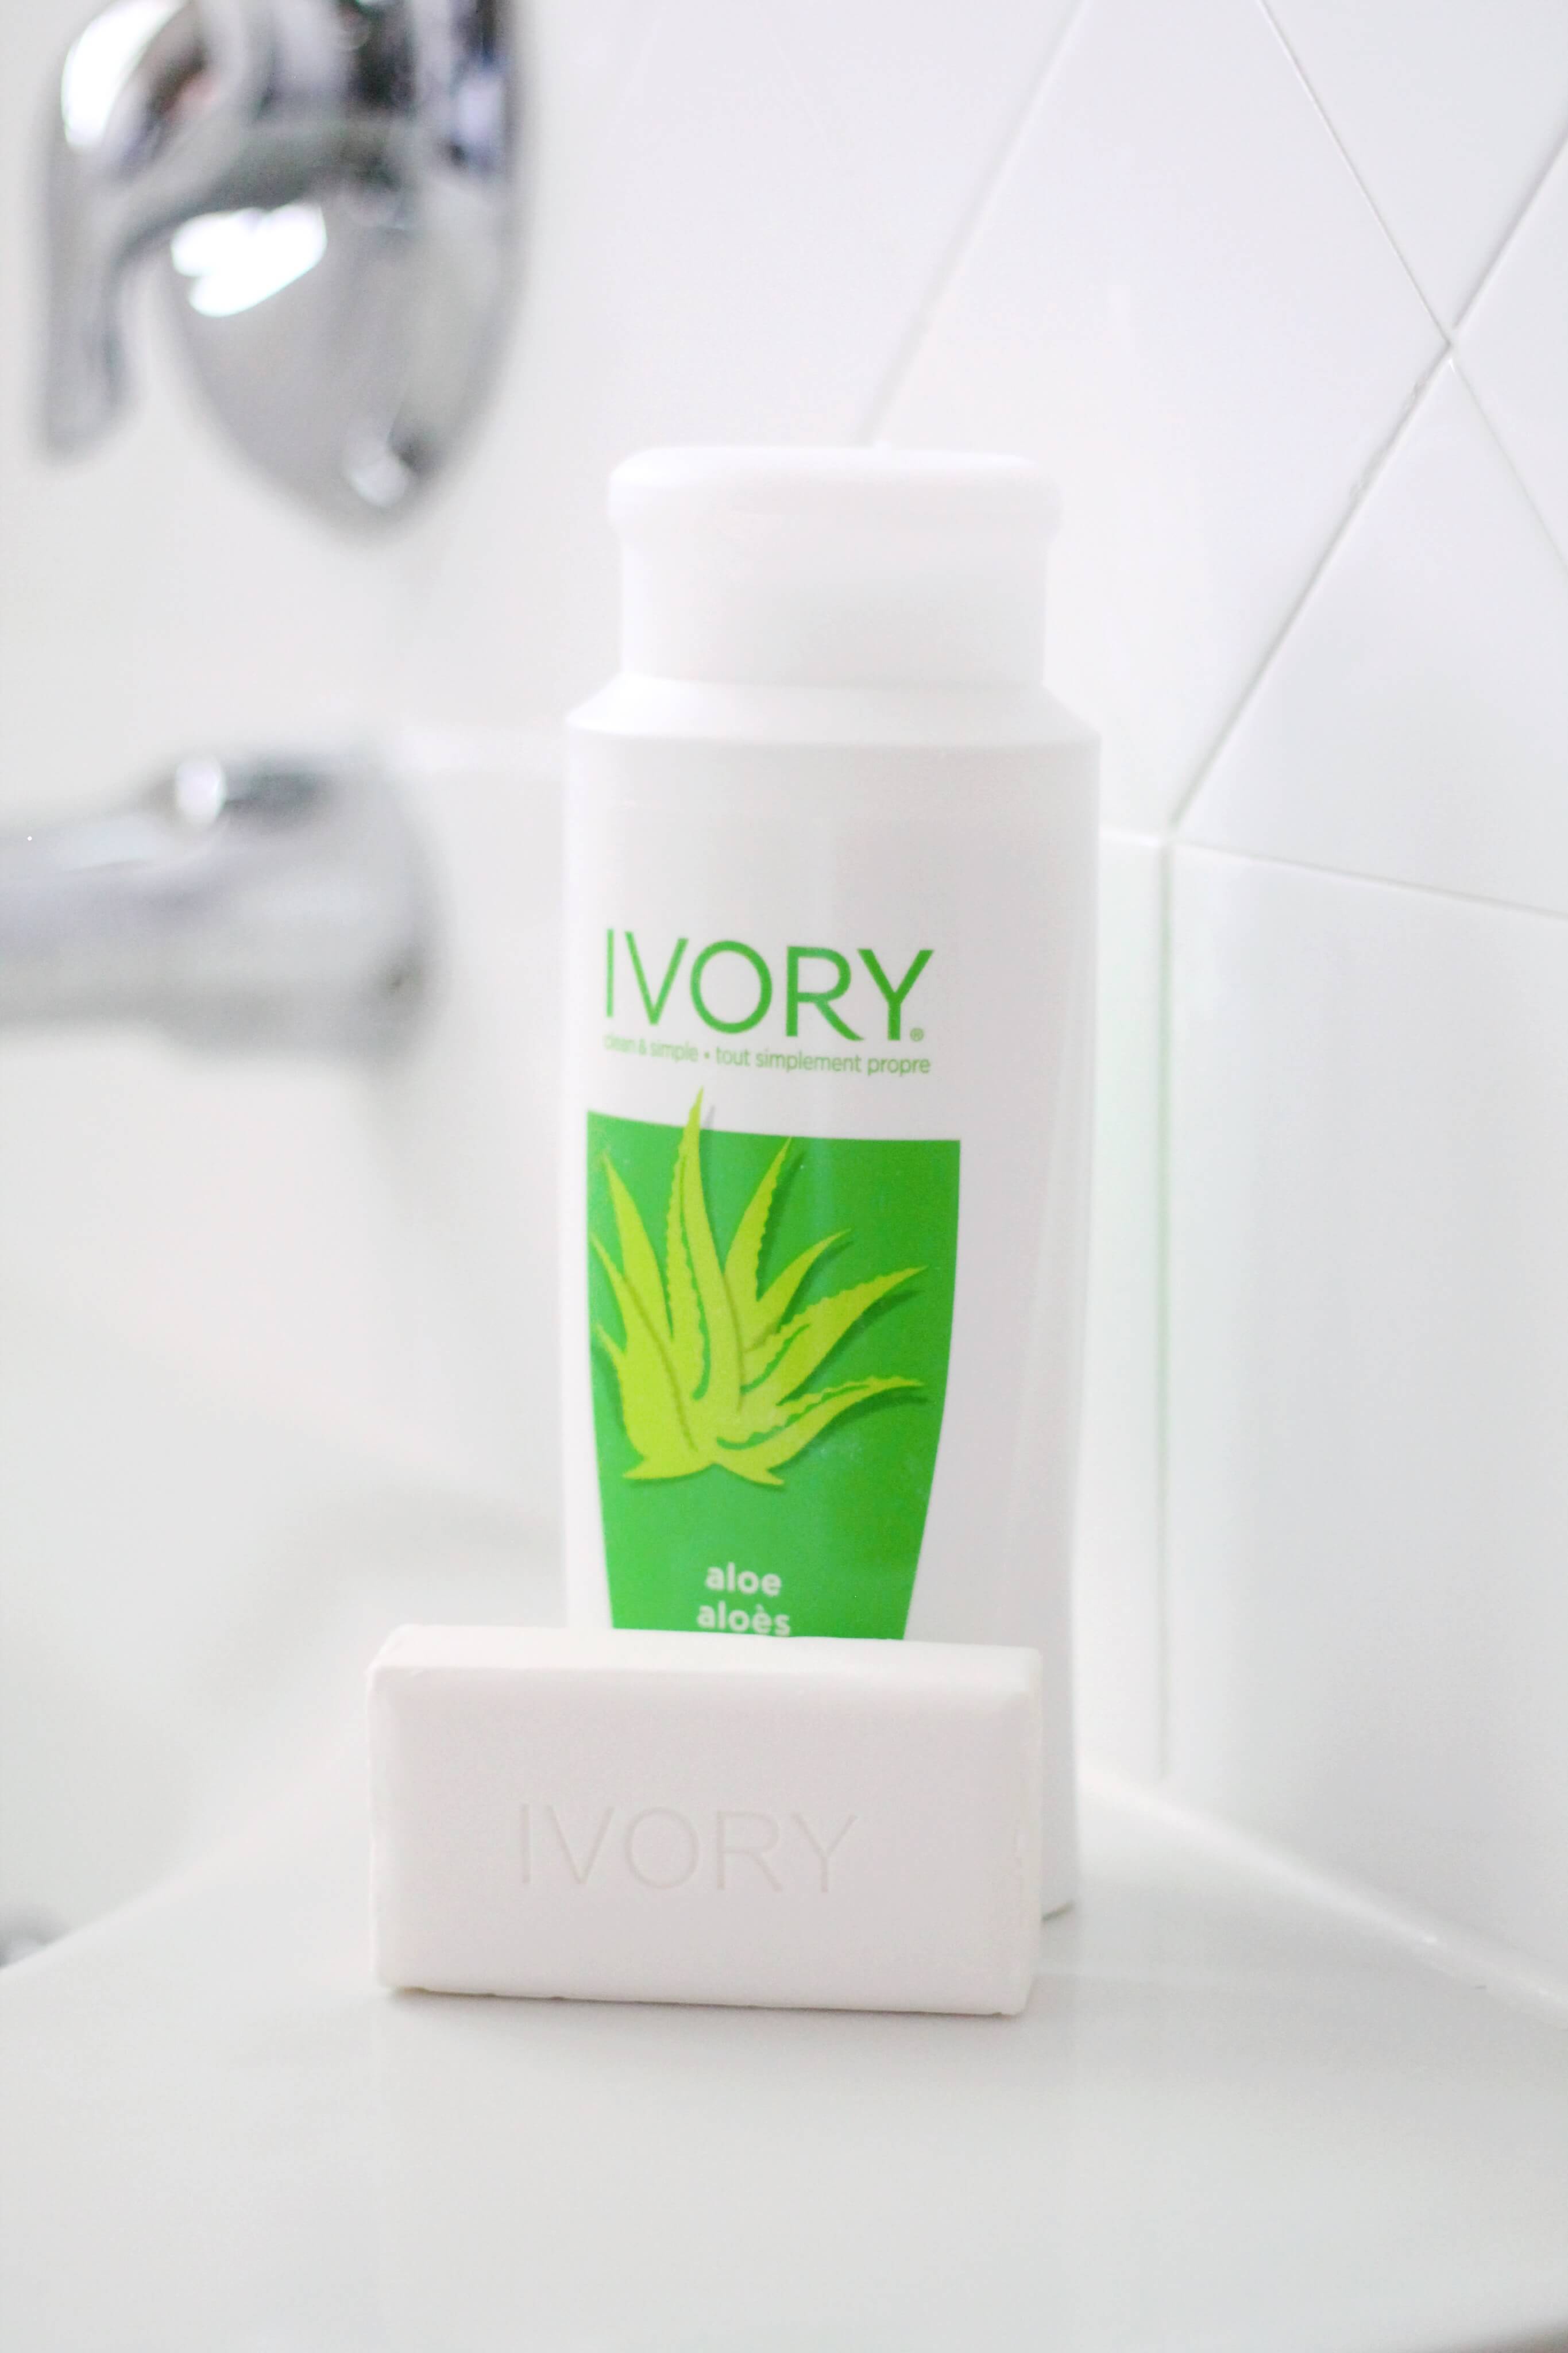 Bedtime routine with Ivory Soap. These bubbles are the best! #ad #everydayivory